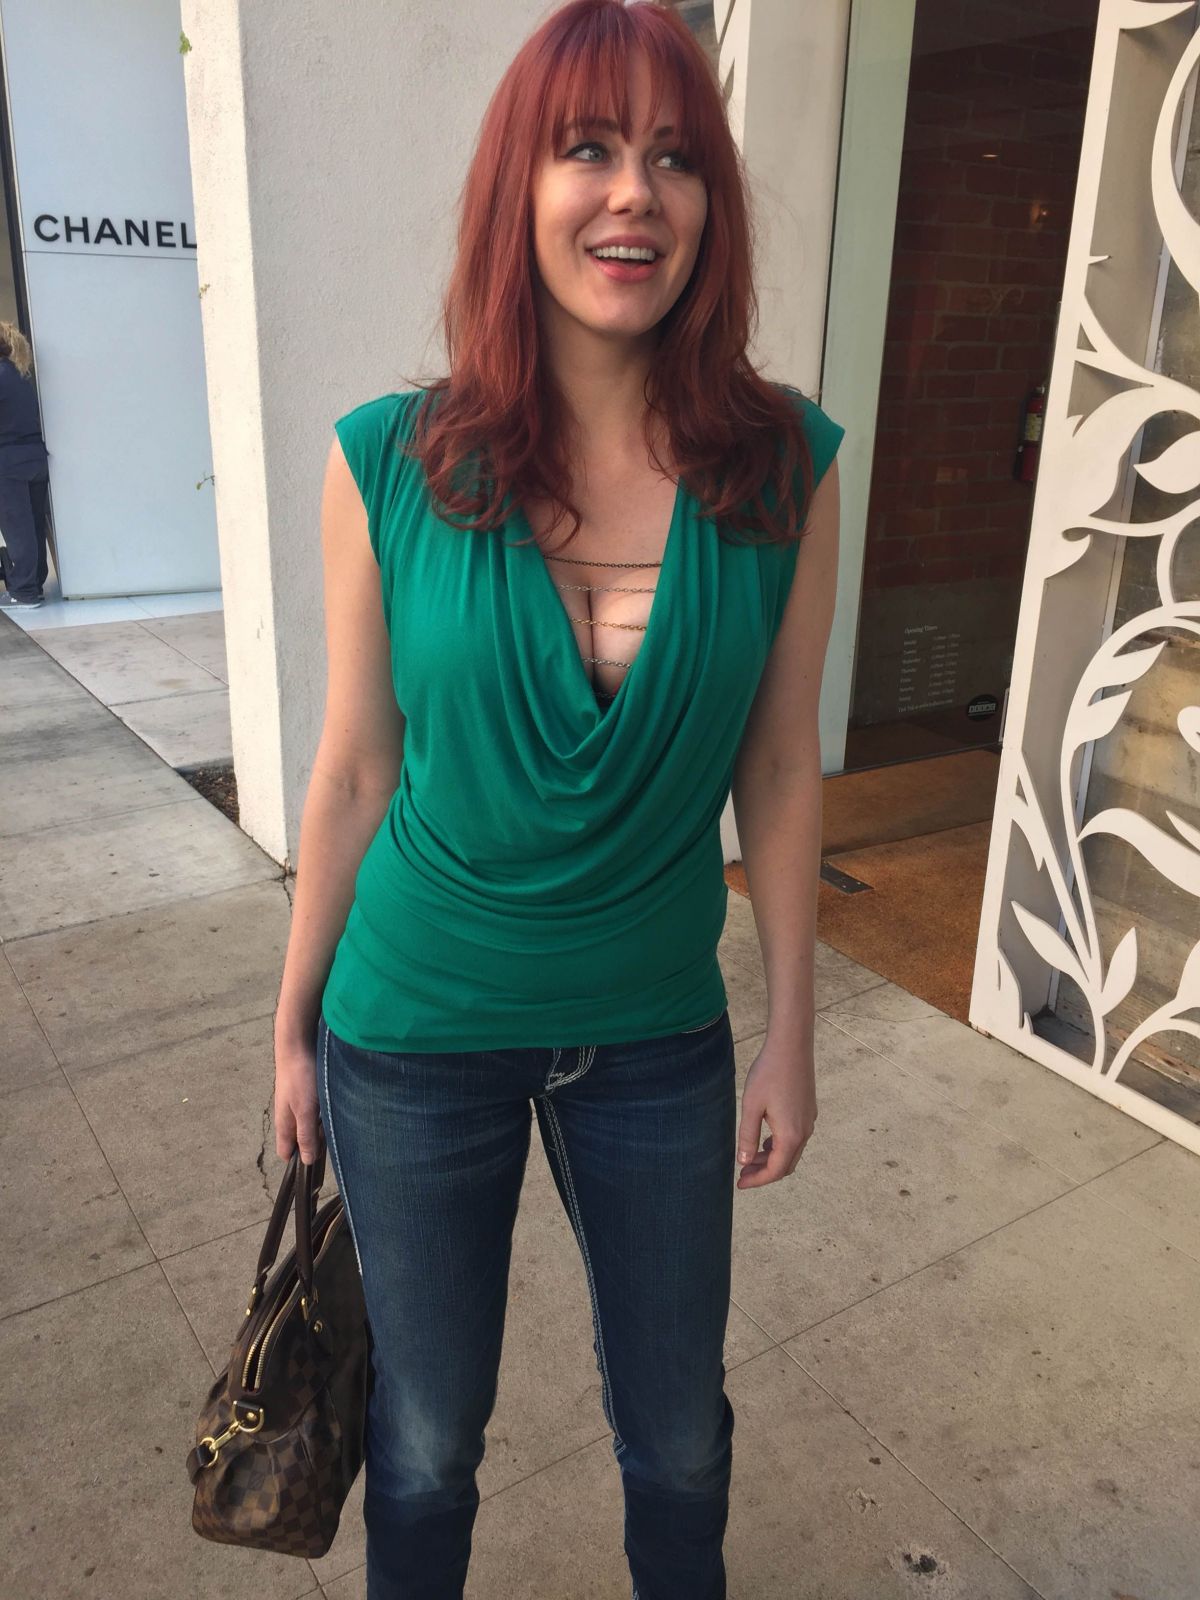 maitland-ward-out-shopping-in-los-angeles-11-17-2015_11.jpg